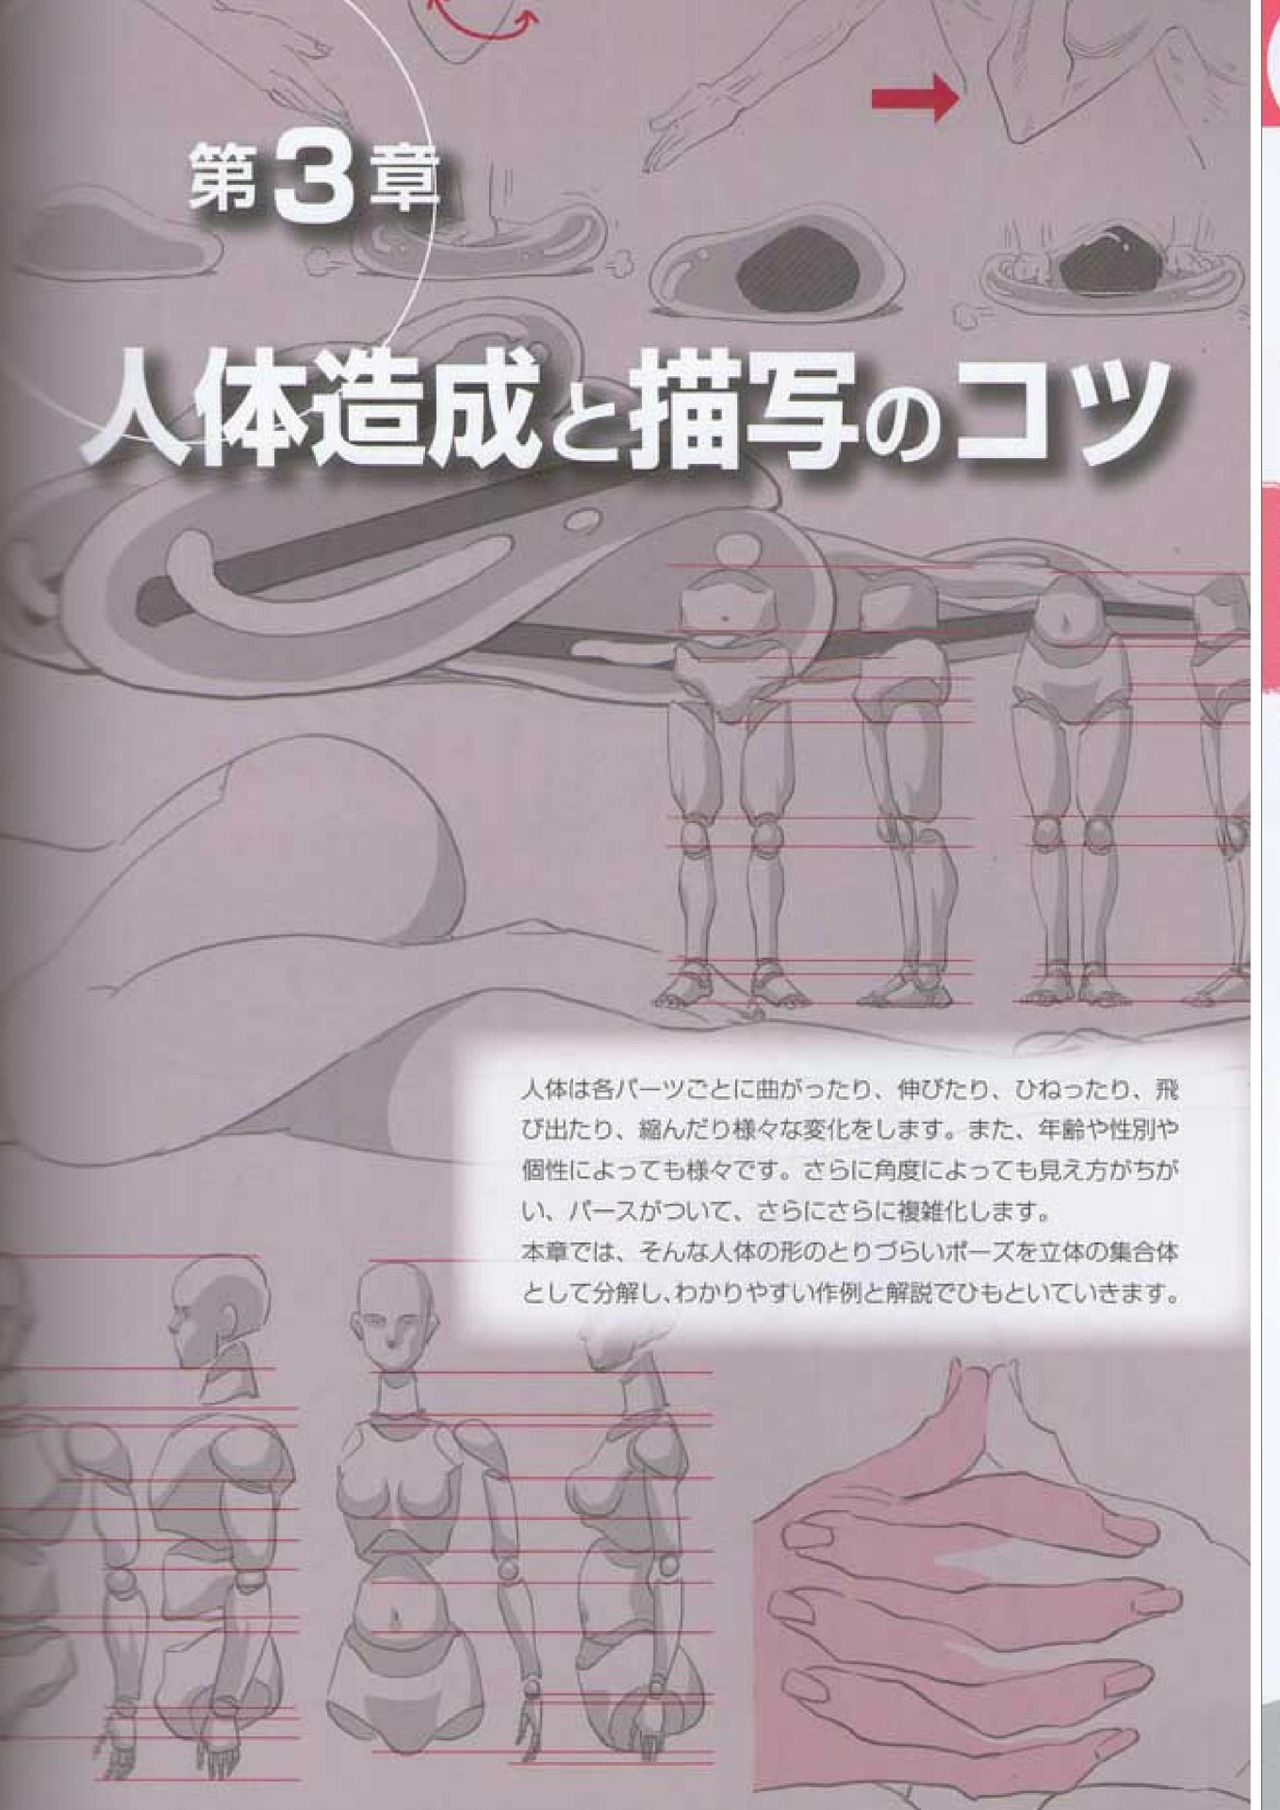 How to draw a character drawing from a human anatomical chart 69